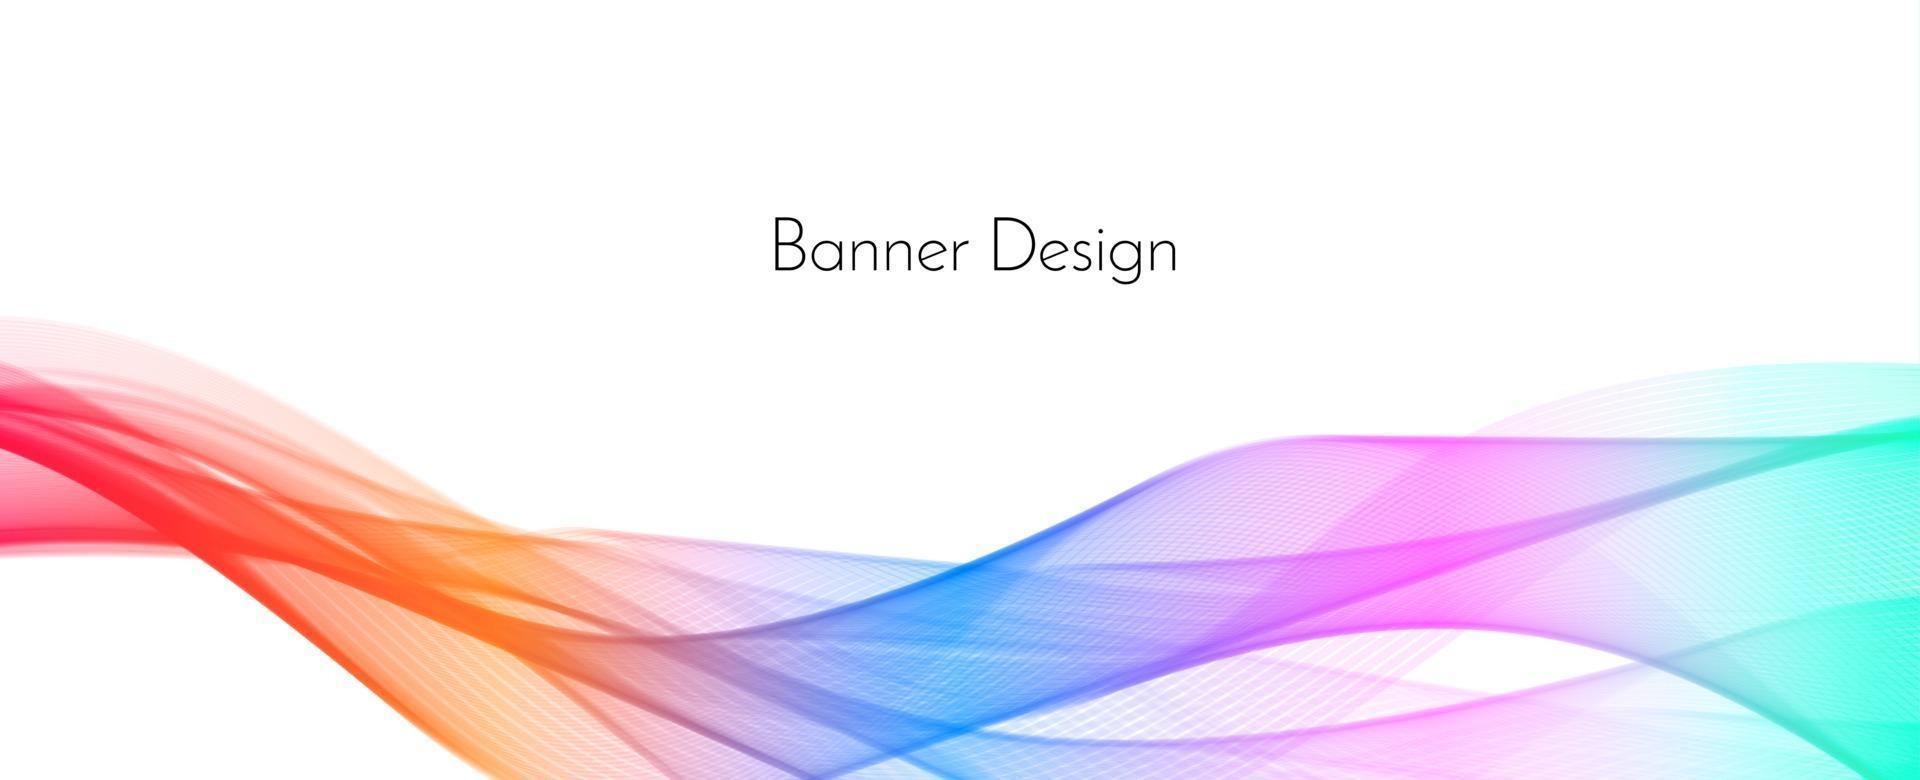 Abstract colorful stylish modern wave design banner background vector